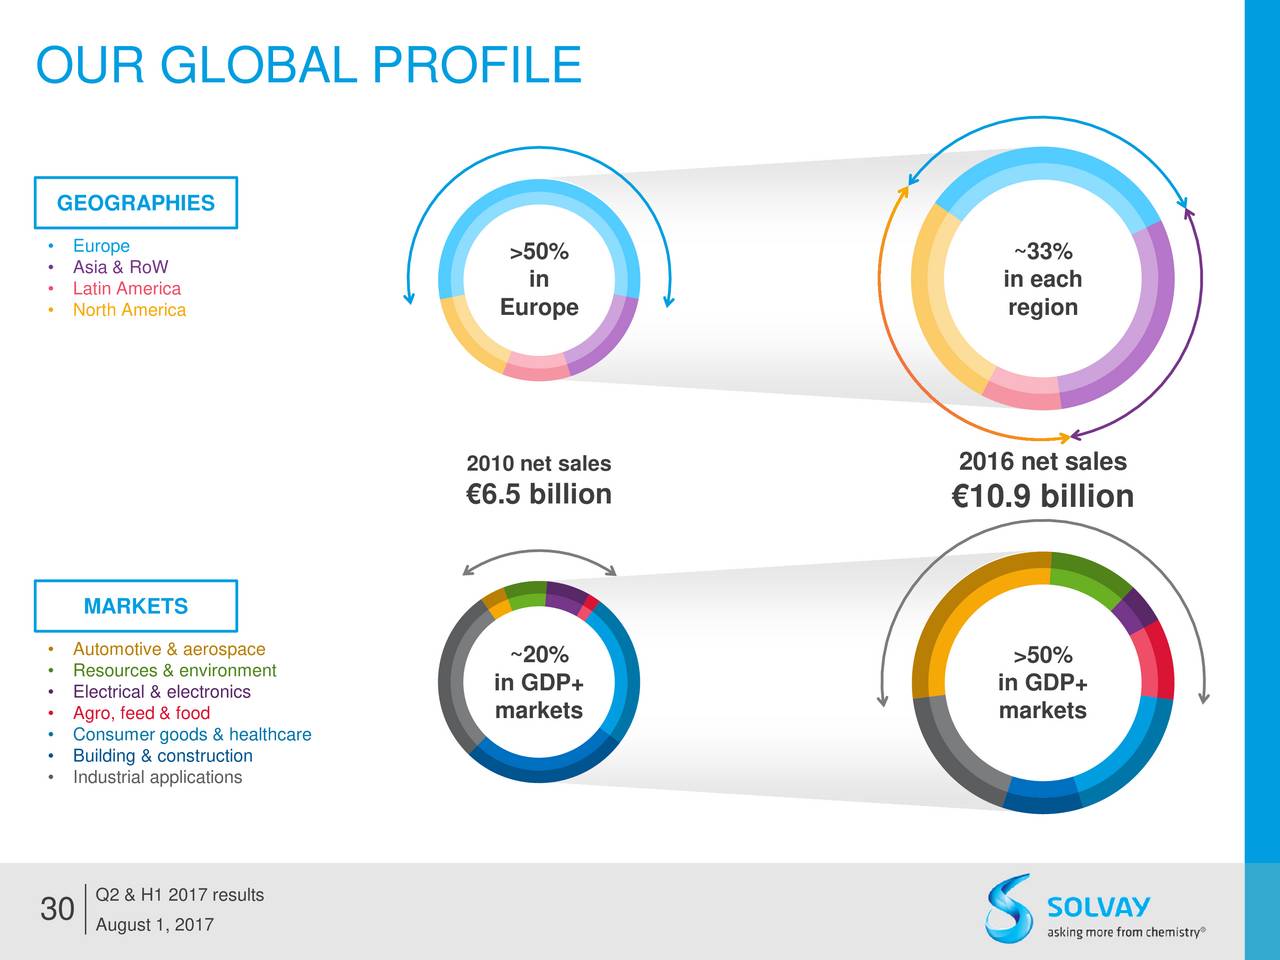 OUR GLOBAL PROFILE